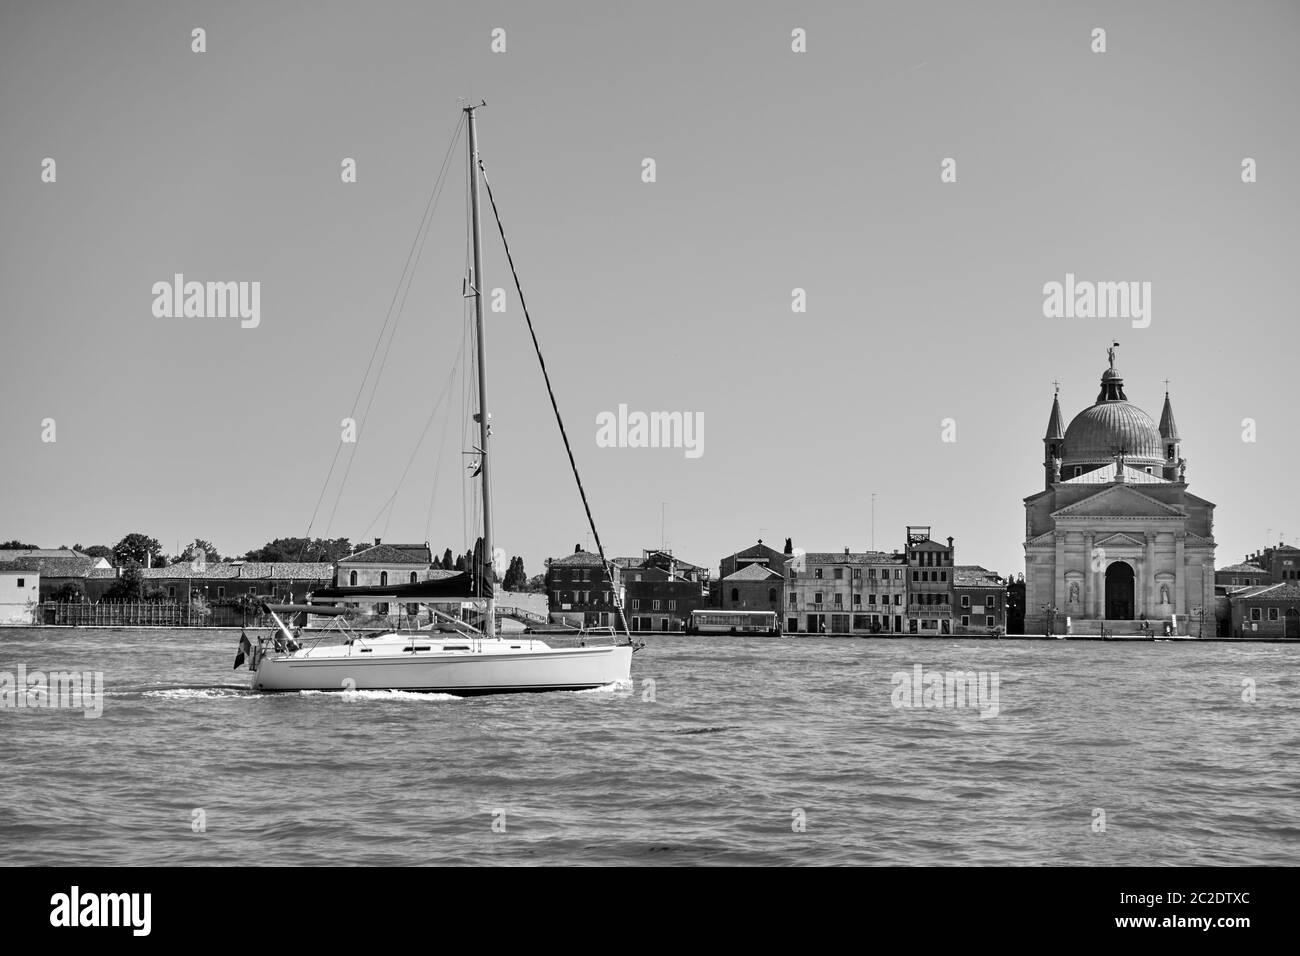 Black and white view of Venice with yacht and Giudecca island, Italy.  Venetian landscape Stock Photo